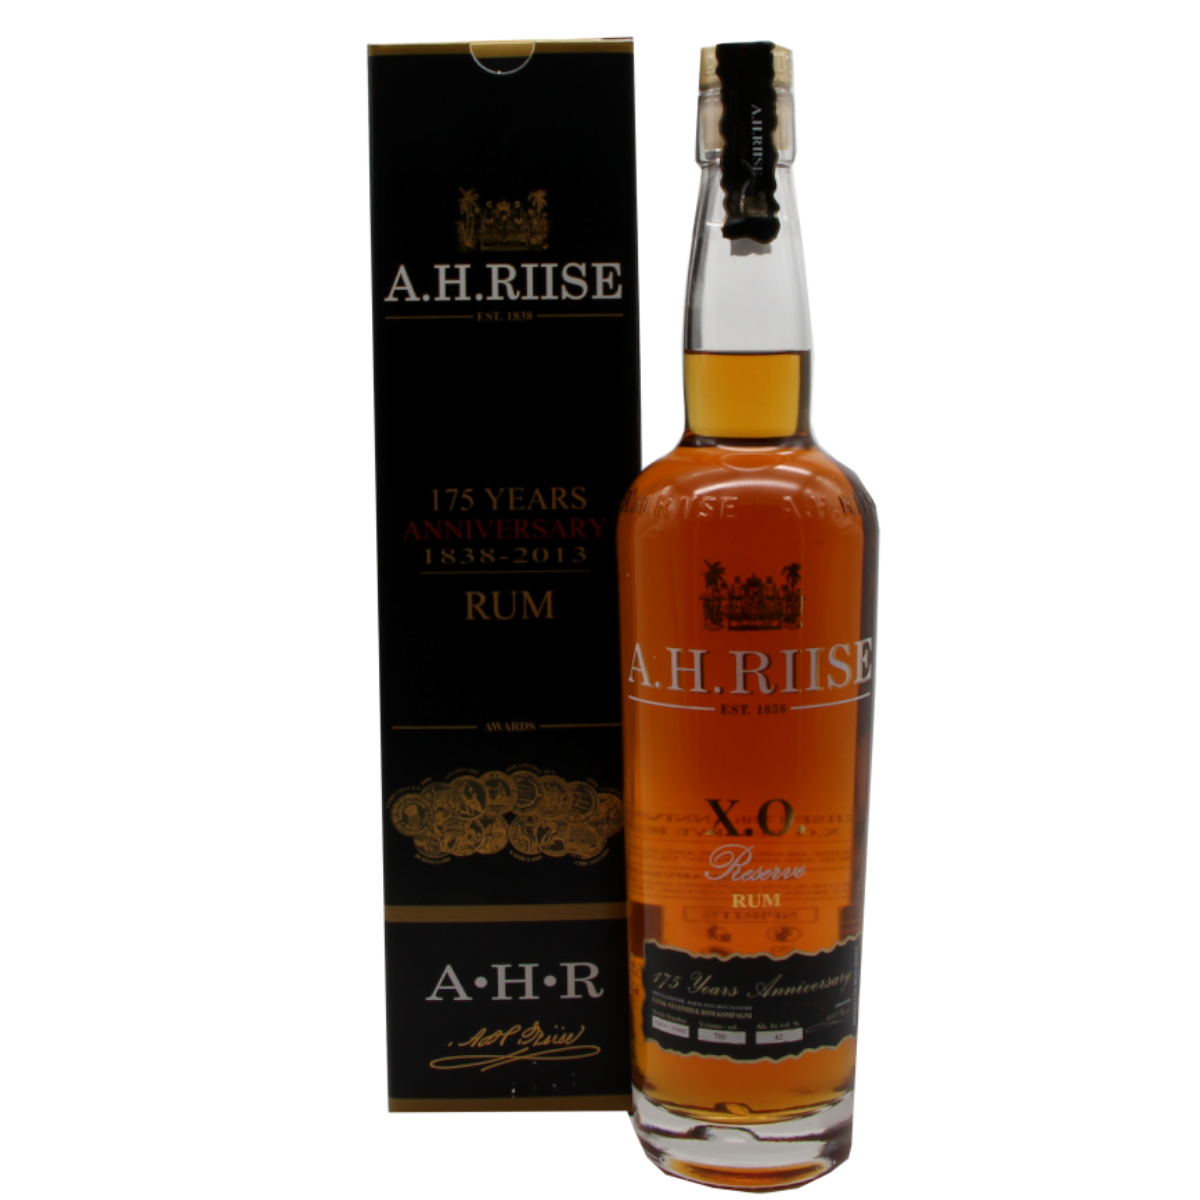 A.H.RIISE XO 175 Years Anniversary  | 42% | 0,7 L